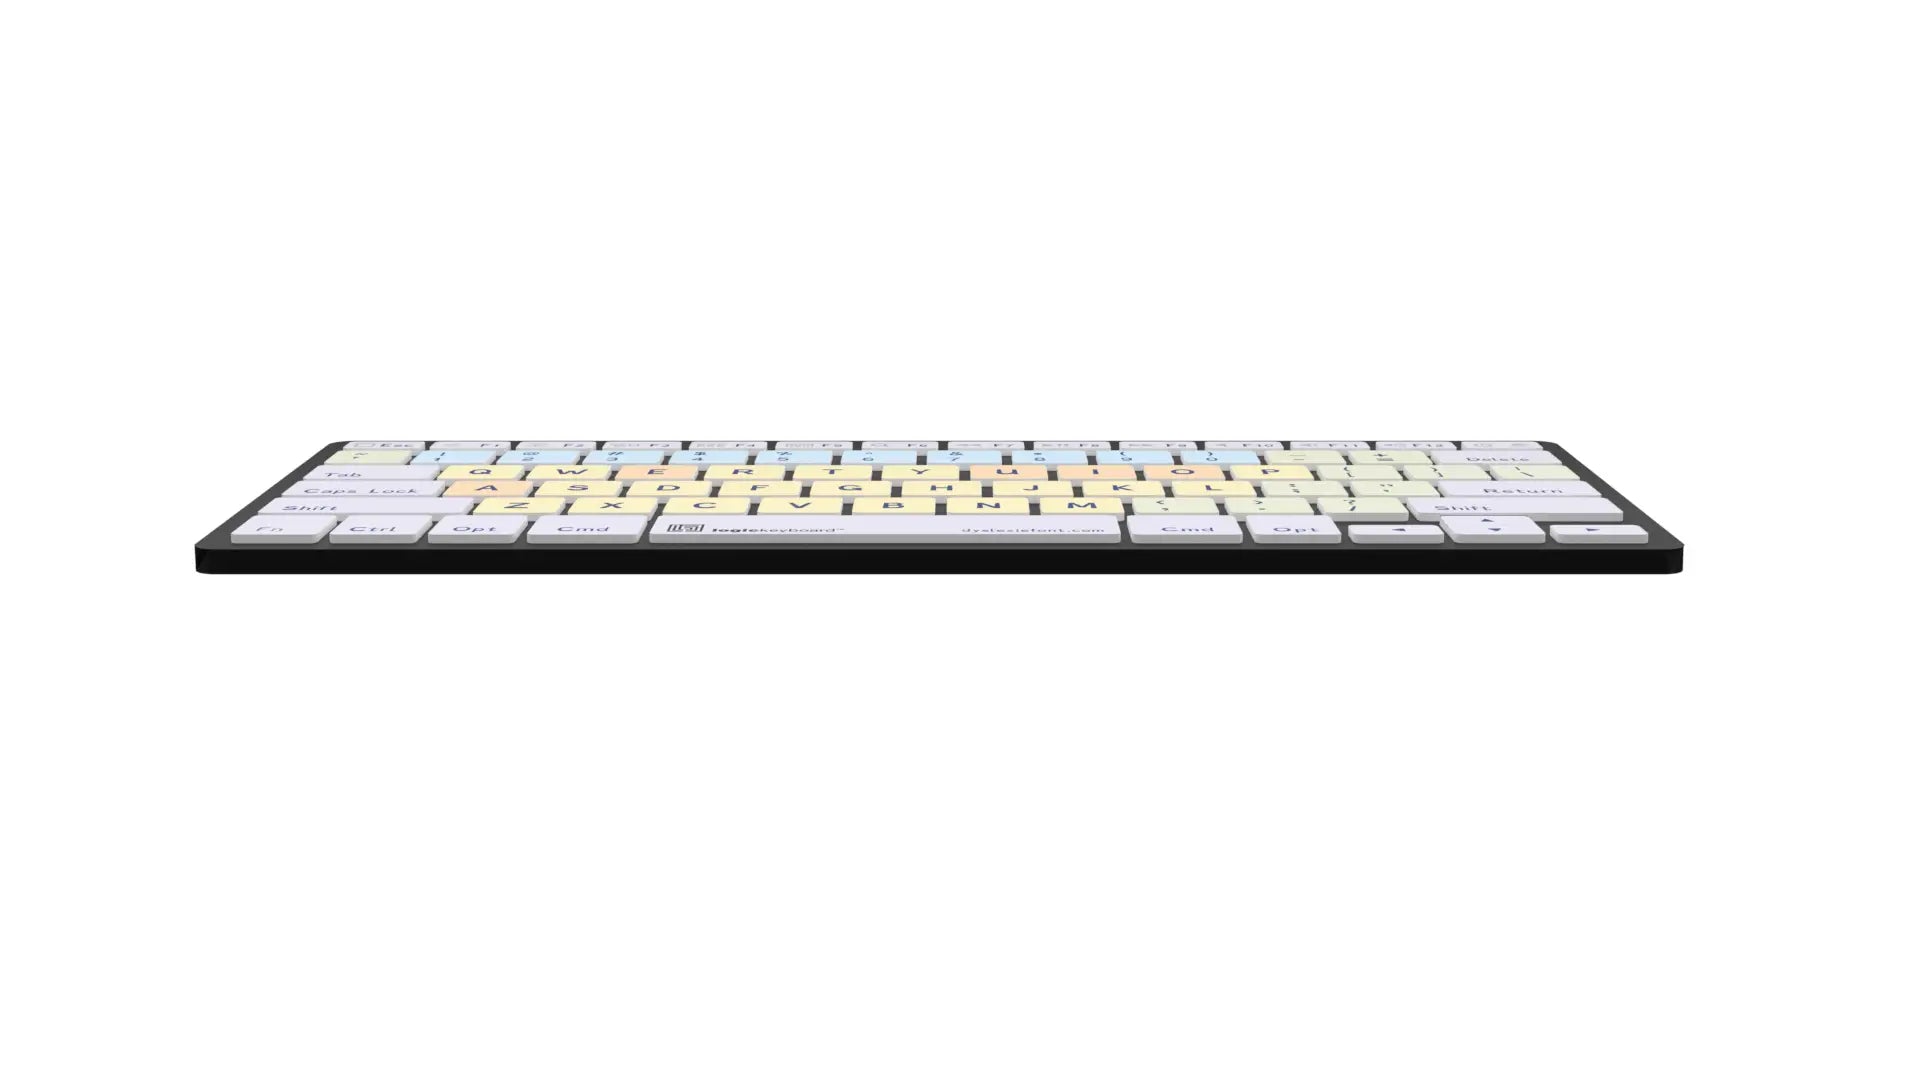 Image of the front edge of the Dyslexie Mini Bluetooth Keyboard LogicKeyboard dyslexia keyboard for Mac.